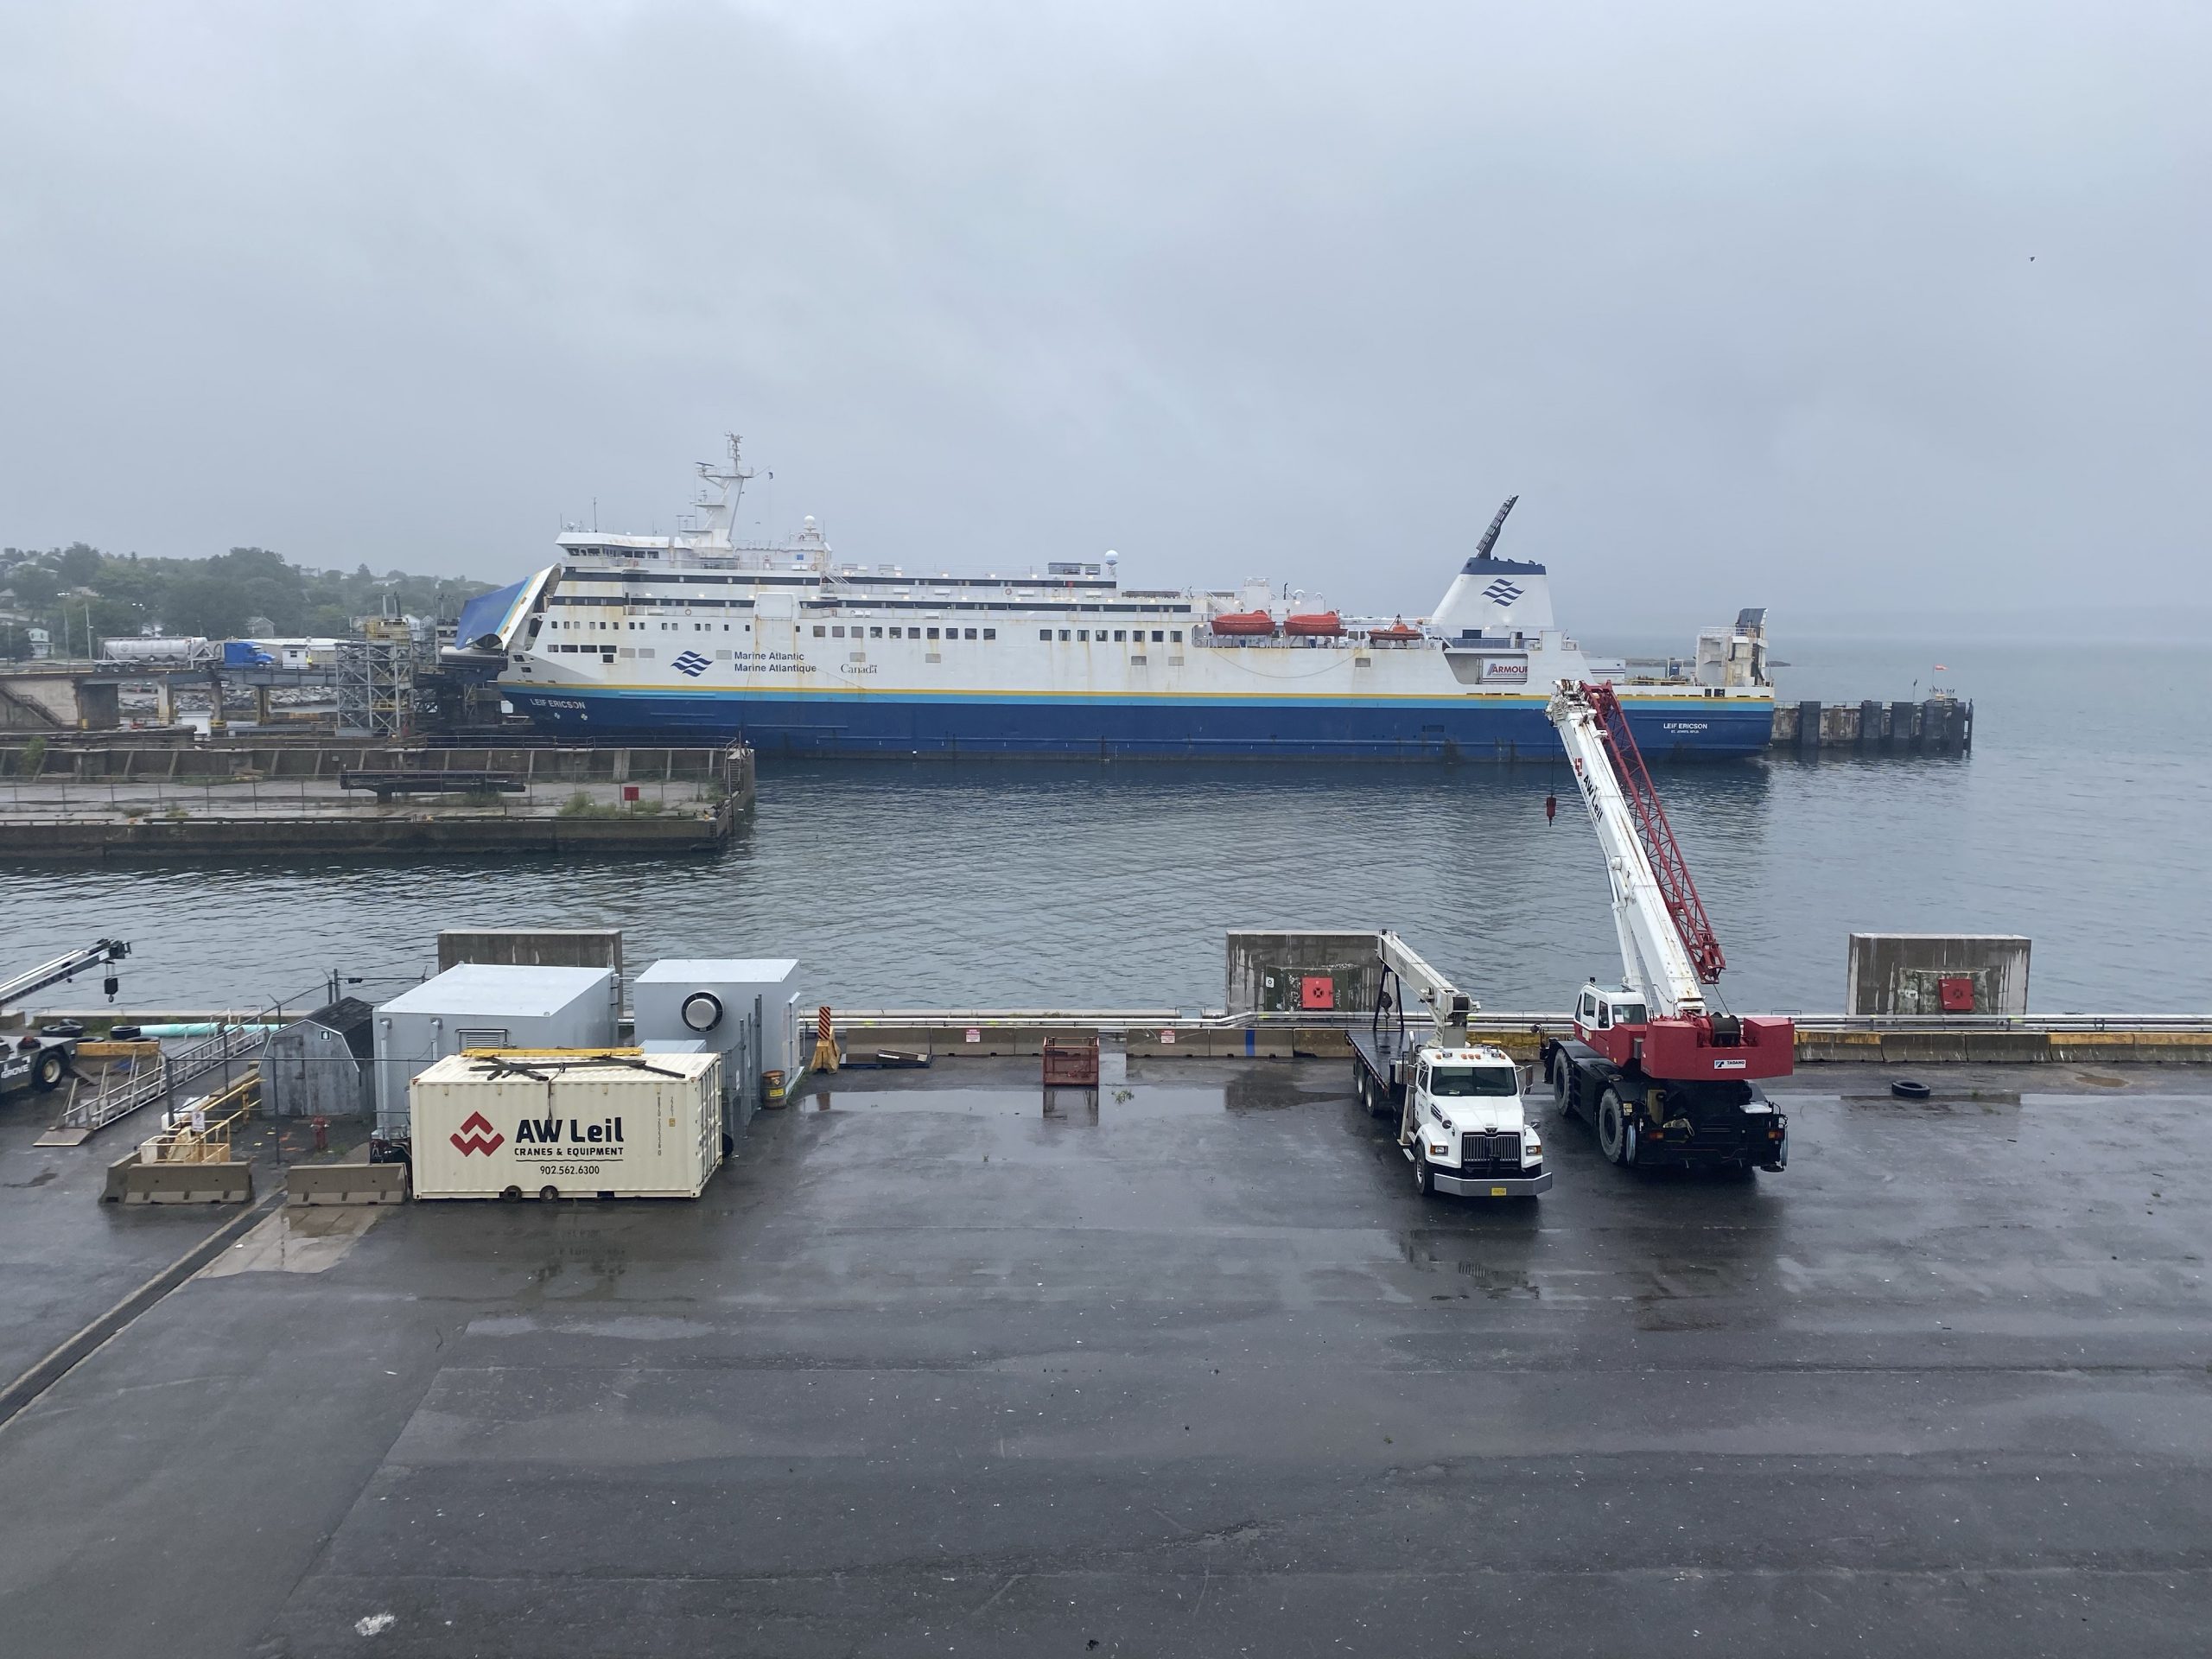 One of the other ferries, the Leif Ericson, docked at the adjacent ferry slip.